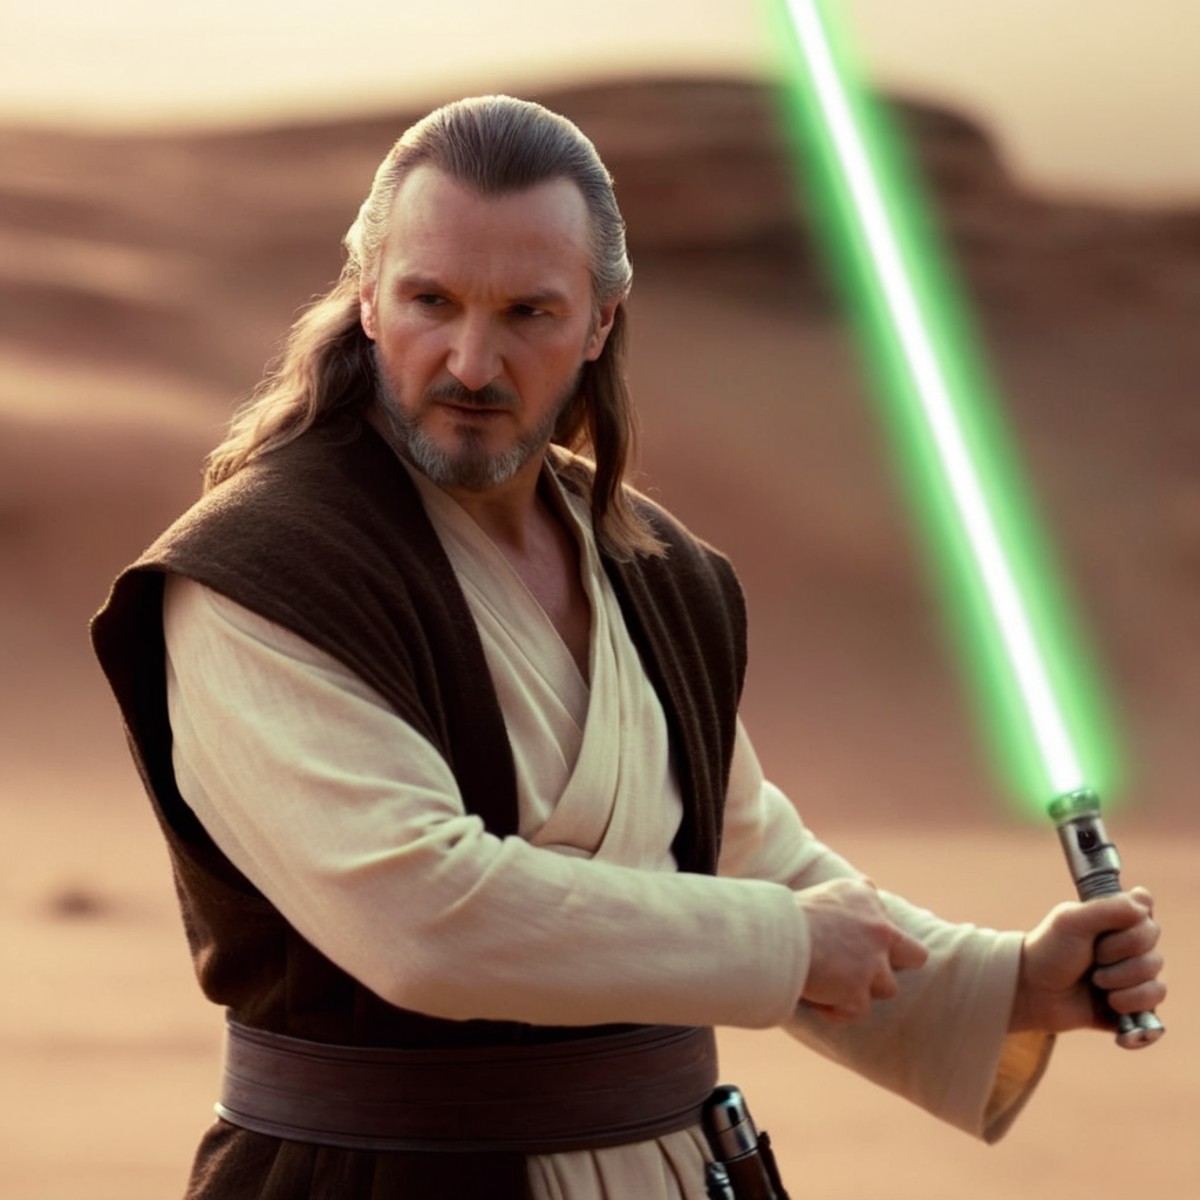 cinematic film still of  <lora:Qui-Gon Jinn:1.2>
Qui-Gon Jinn a man with a lightsaber in his hand in star wars universe, s...